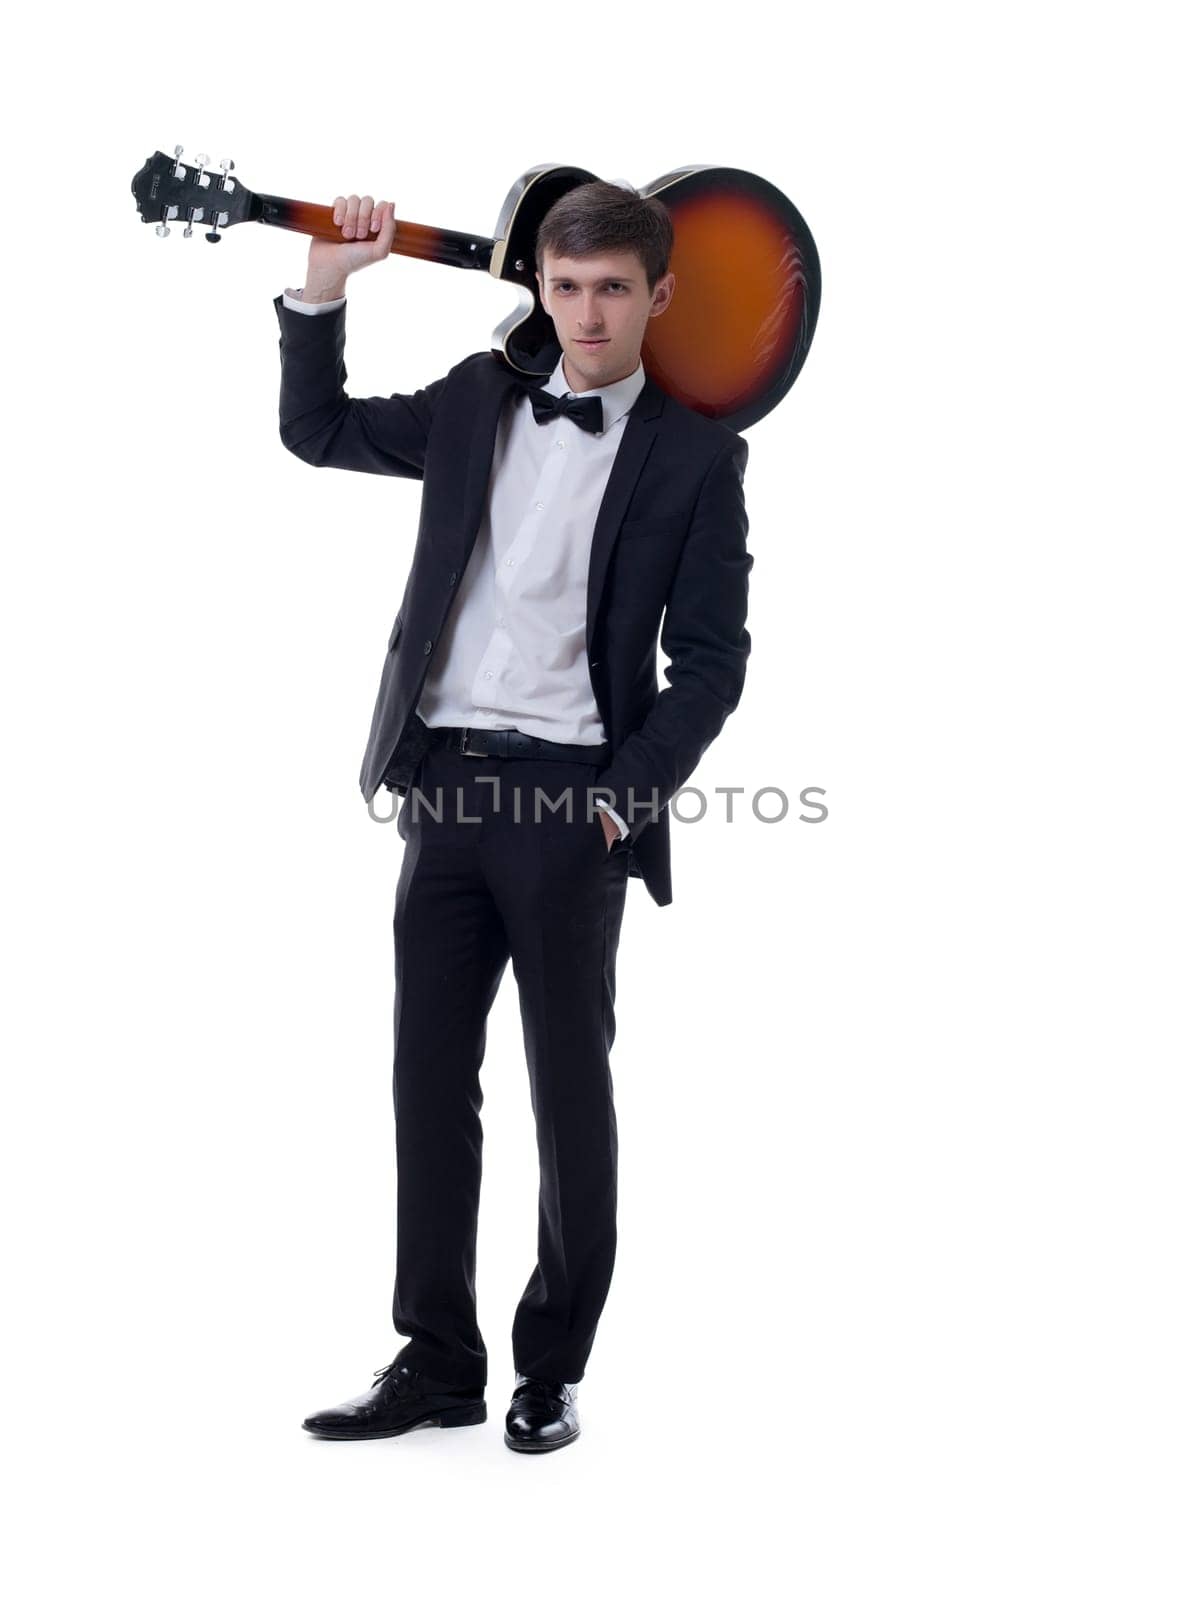 Elegant musician posing with guitar, isolated on white